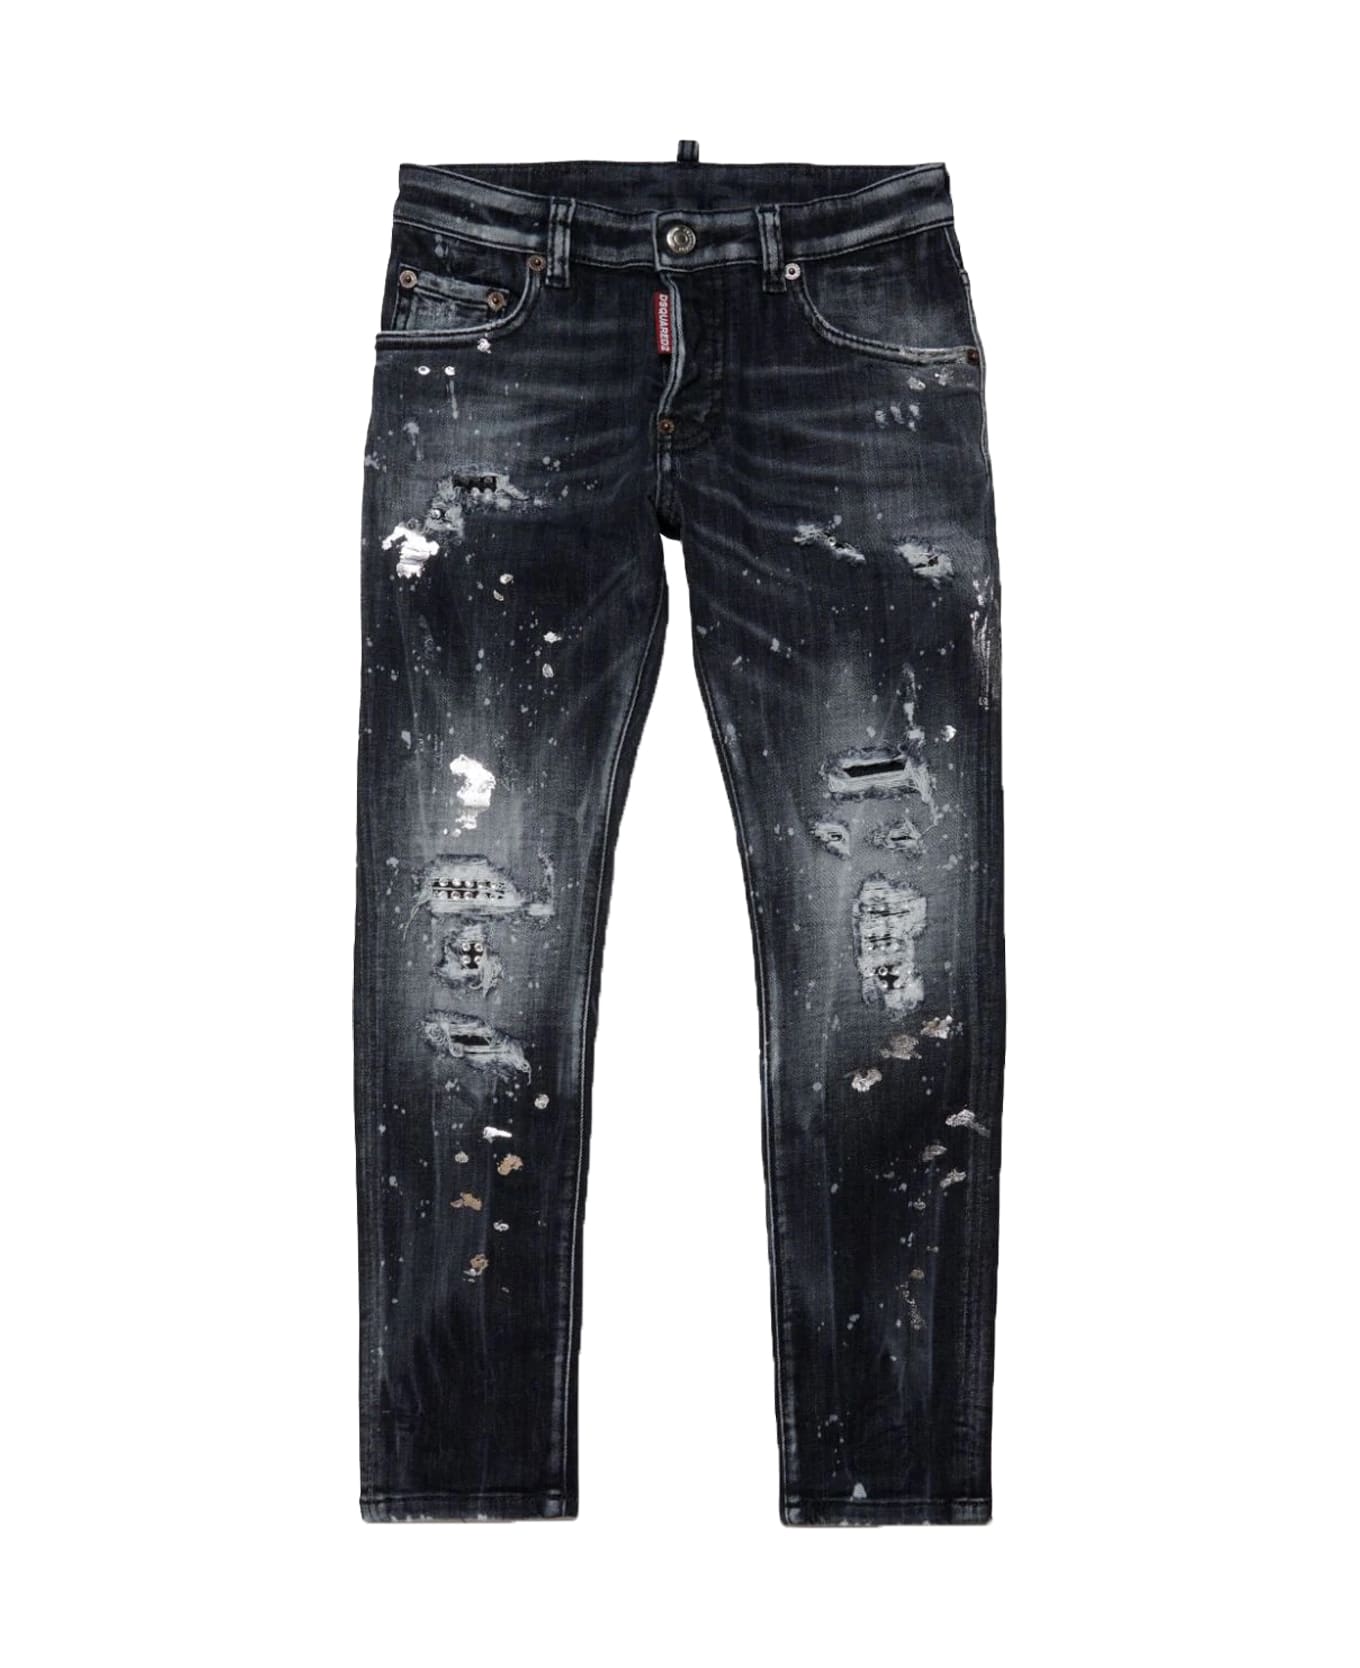 Dsquared2 Jeans - Back ボトムス